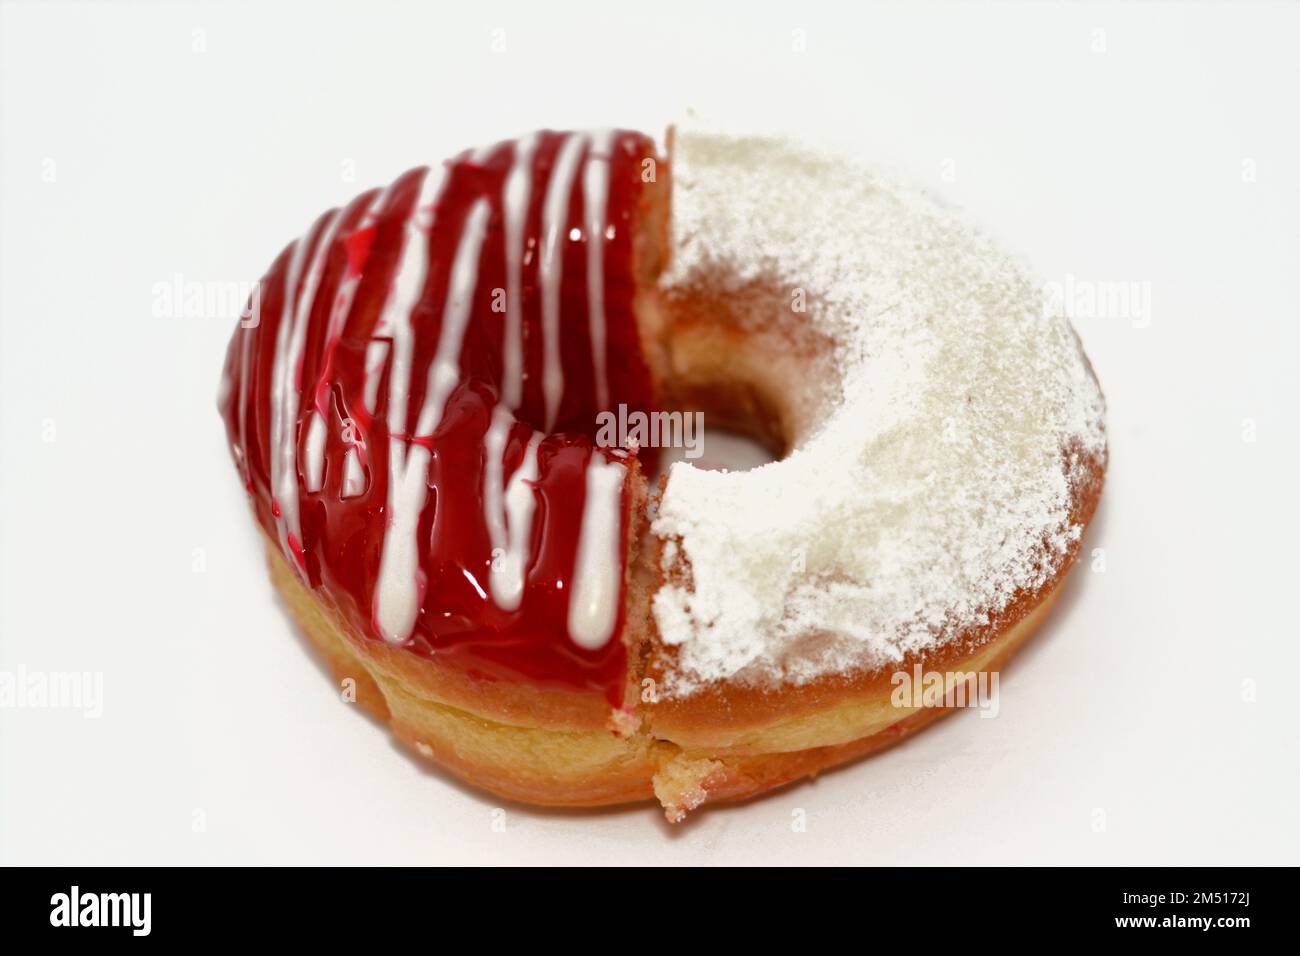 Icing powdered confectioners' sugar and Strawberry flavored ring donut, A glazed, yeast raised, American style ring doughnut with topping, type of foo Stock Photo